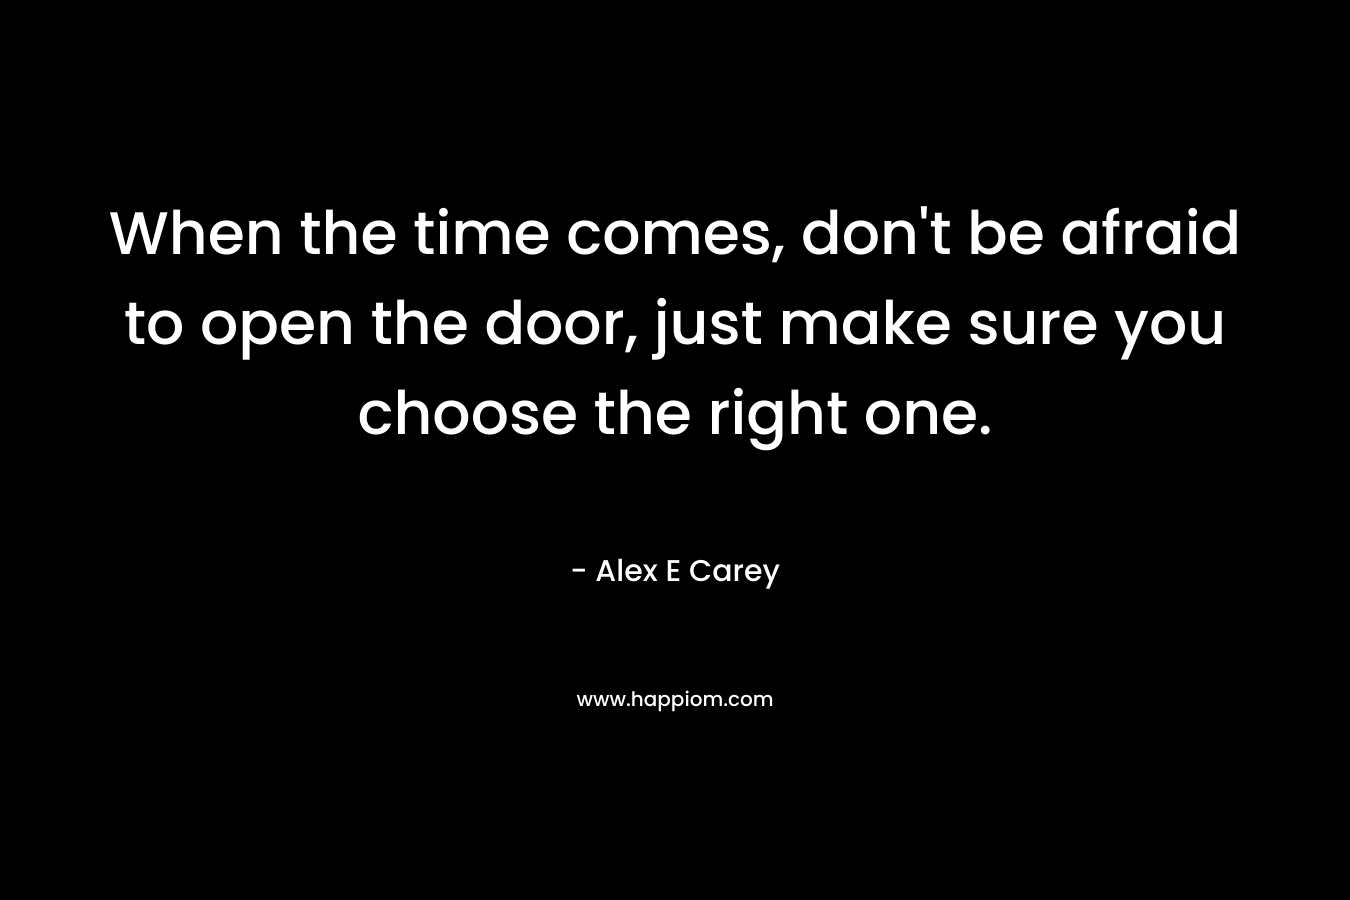 When the time comes, don't be afraid to open the door, just make sure you choose the right one.